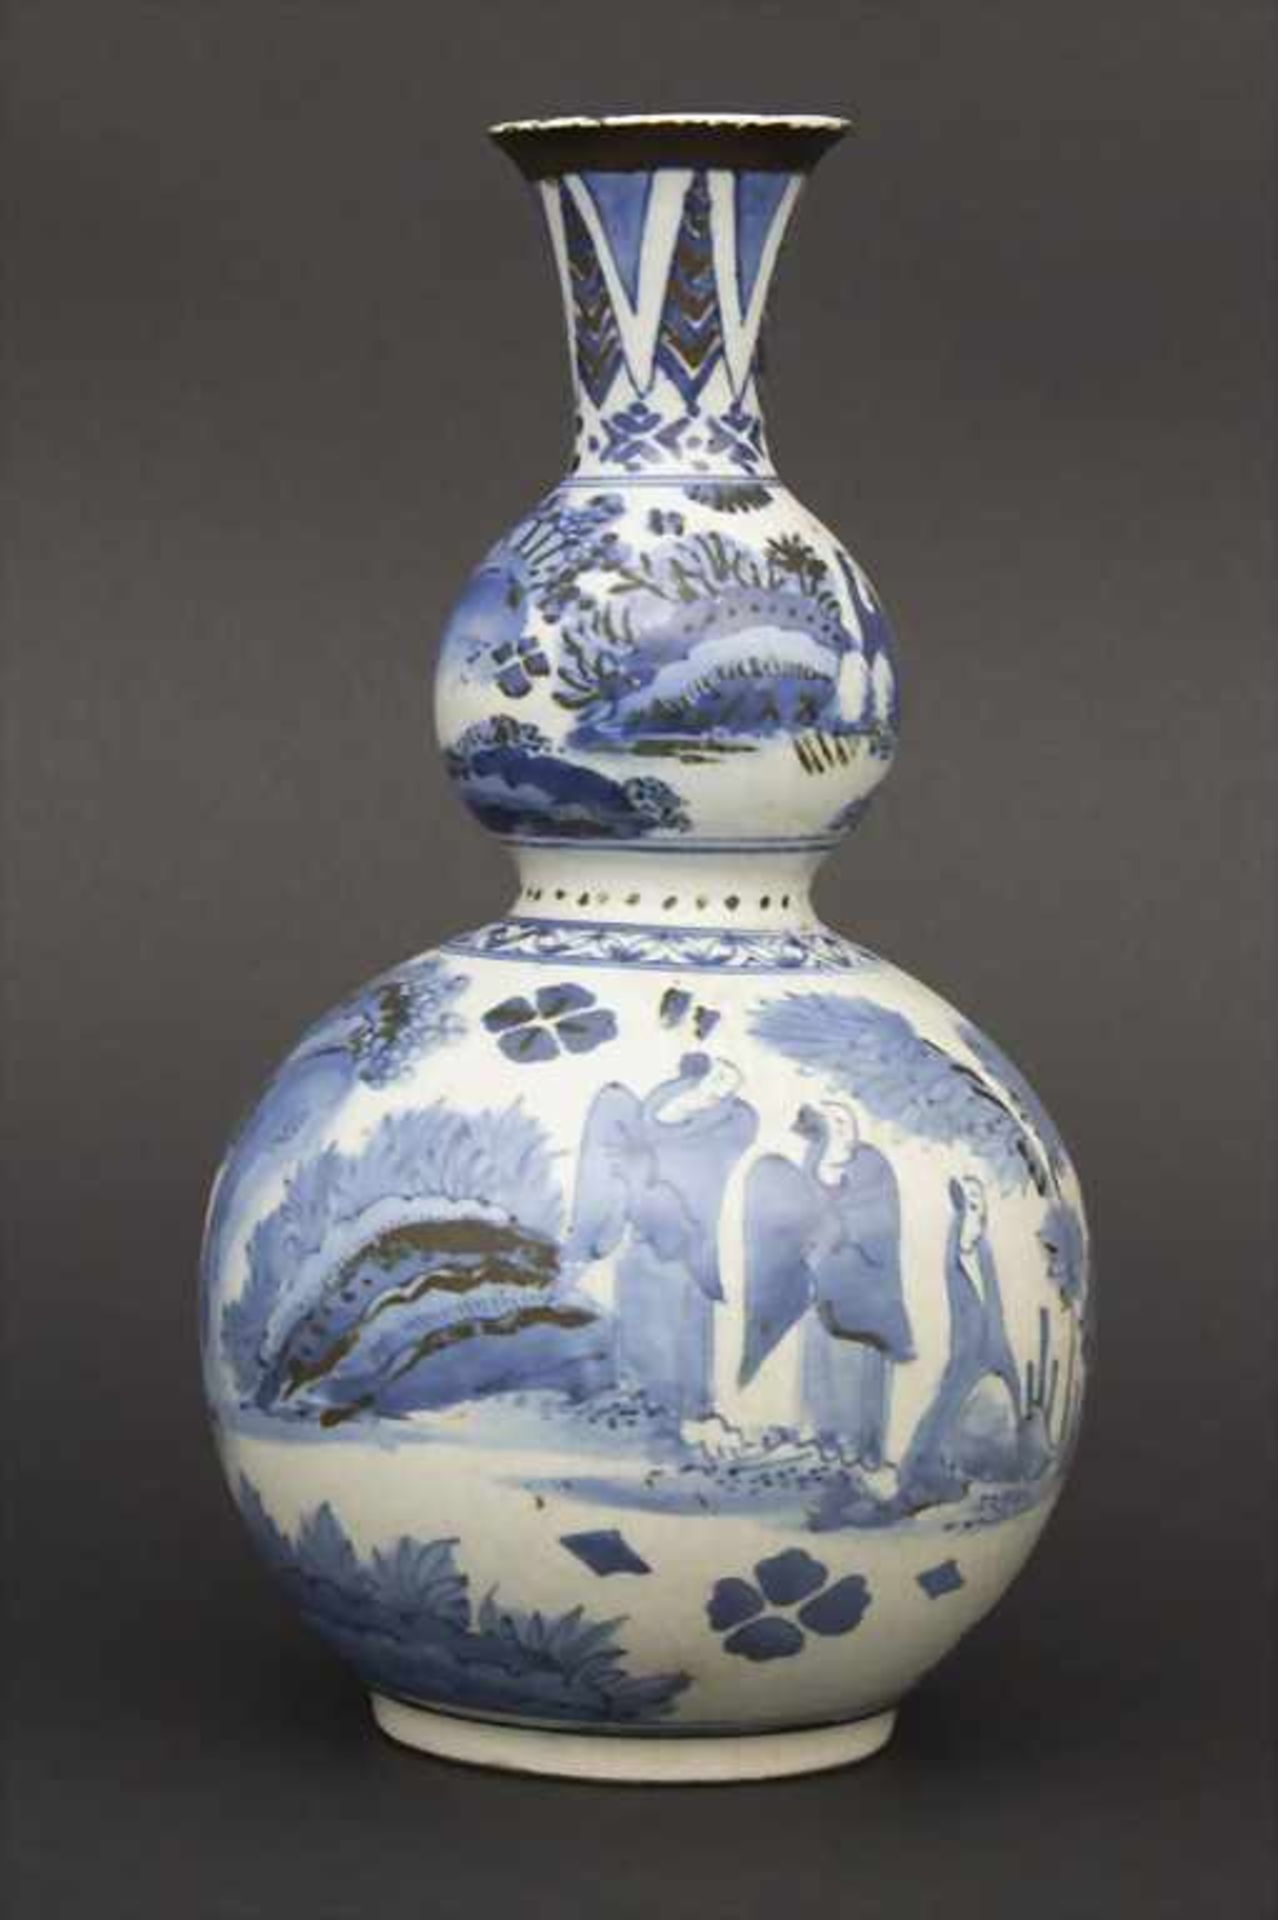 Ziervase / A vase, China, Ming/Qing- Dynastie - Image 3 of 7